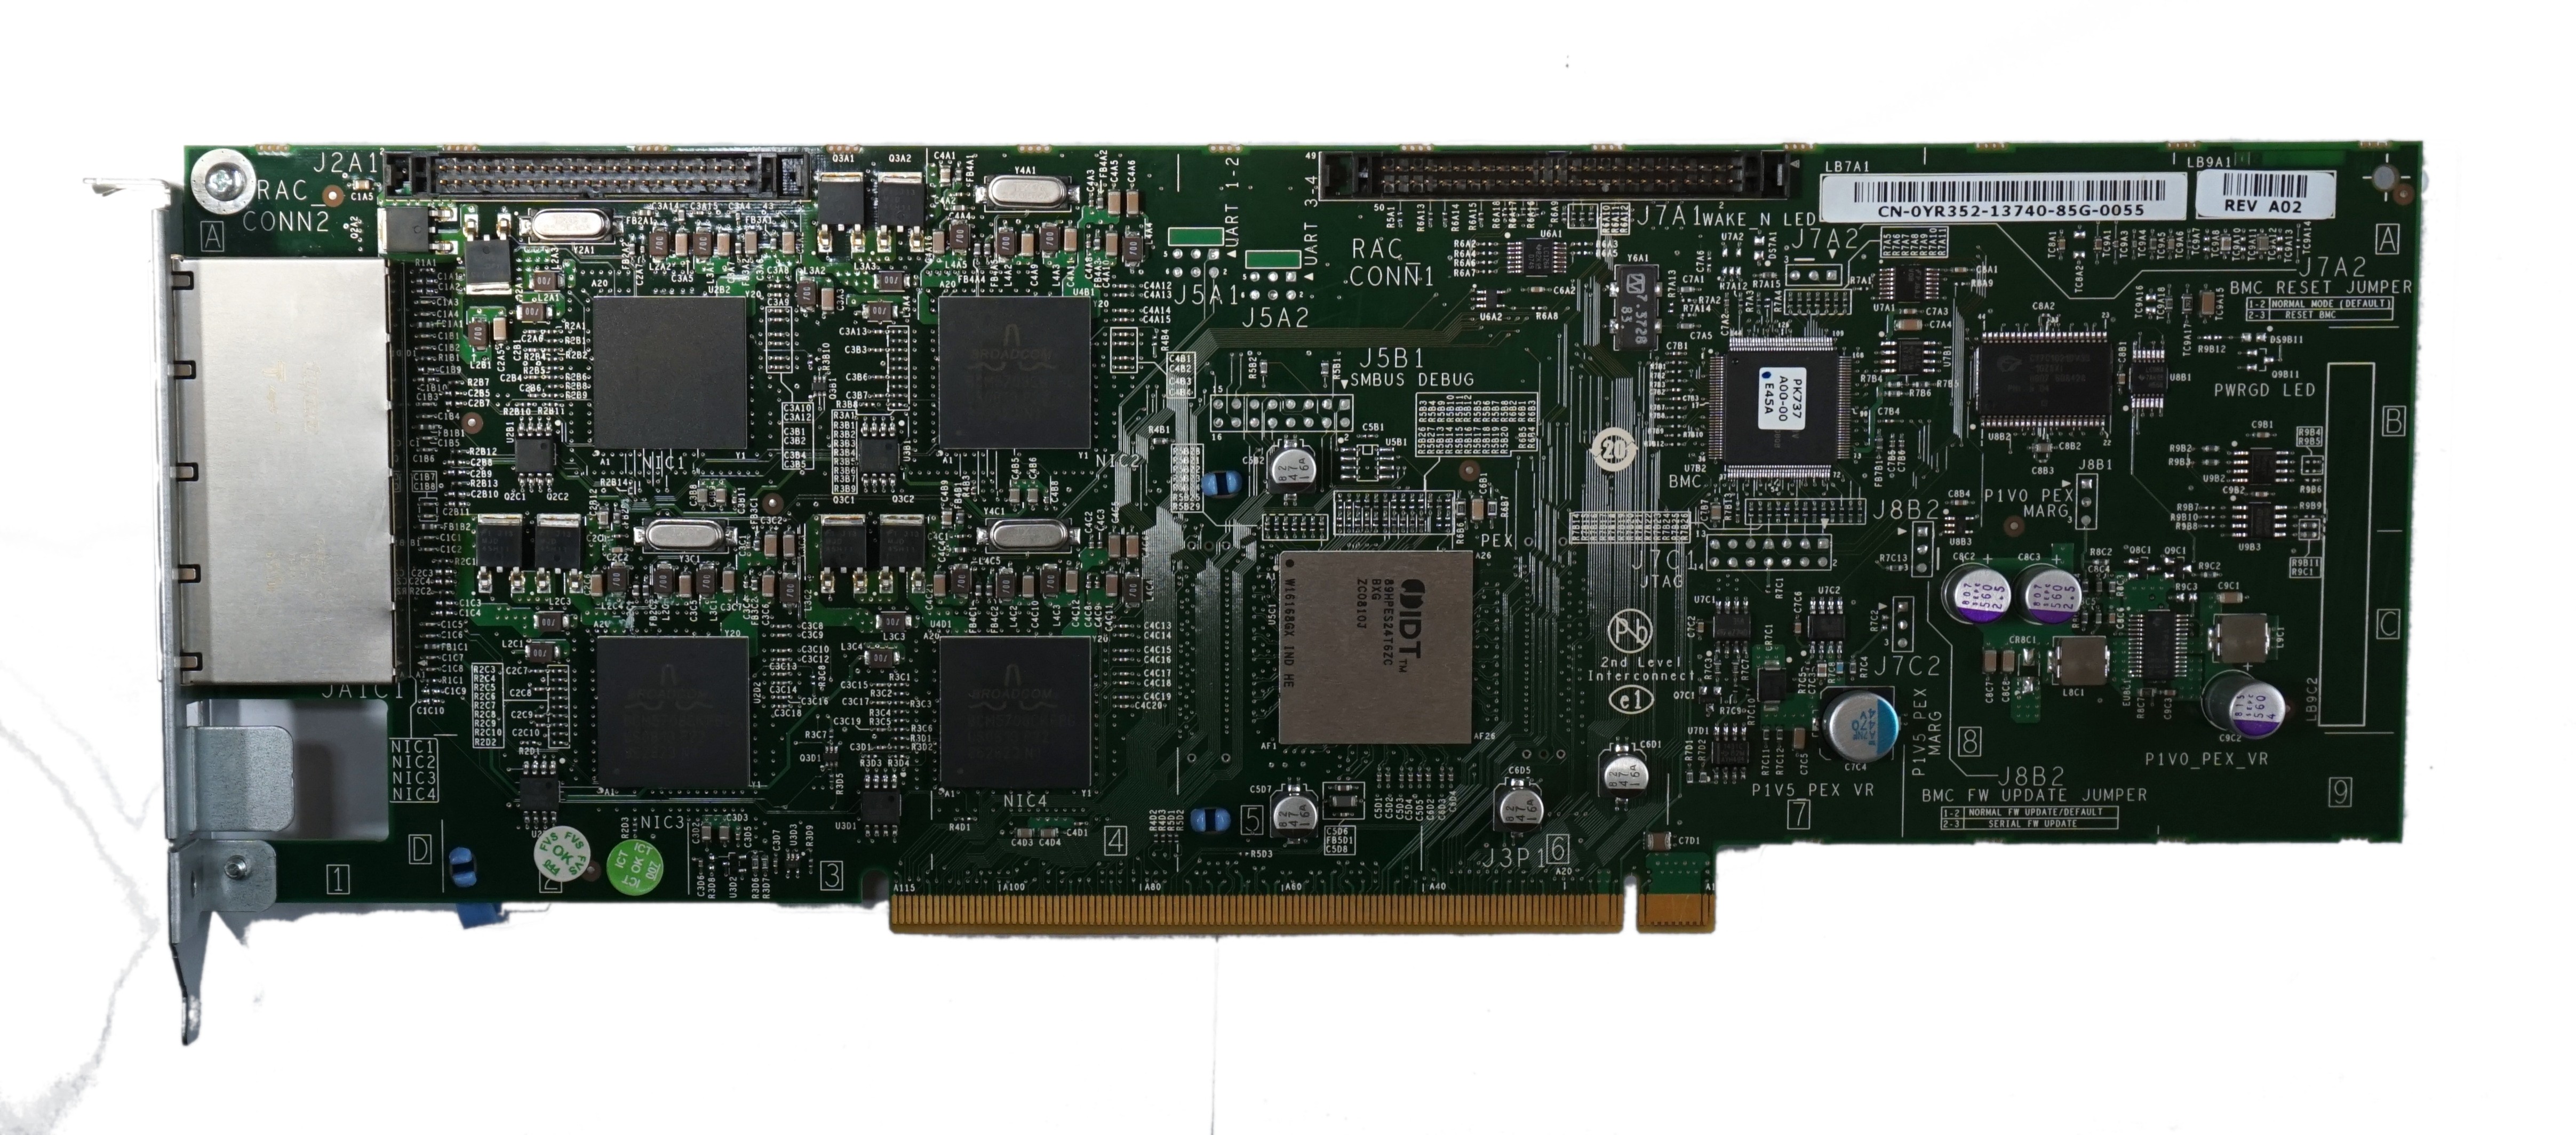 Dell BCM5708 Quad Port - 1GbE R900 Full Height PCIe Ethernet